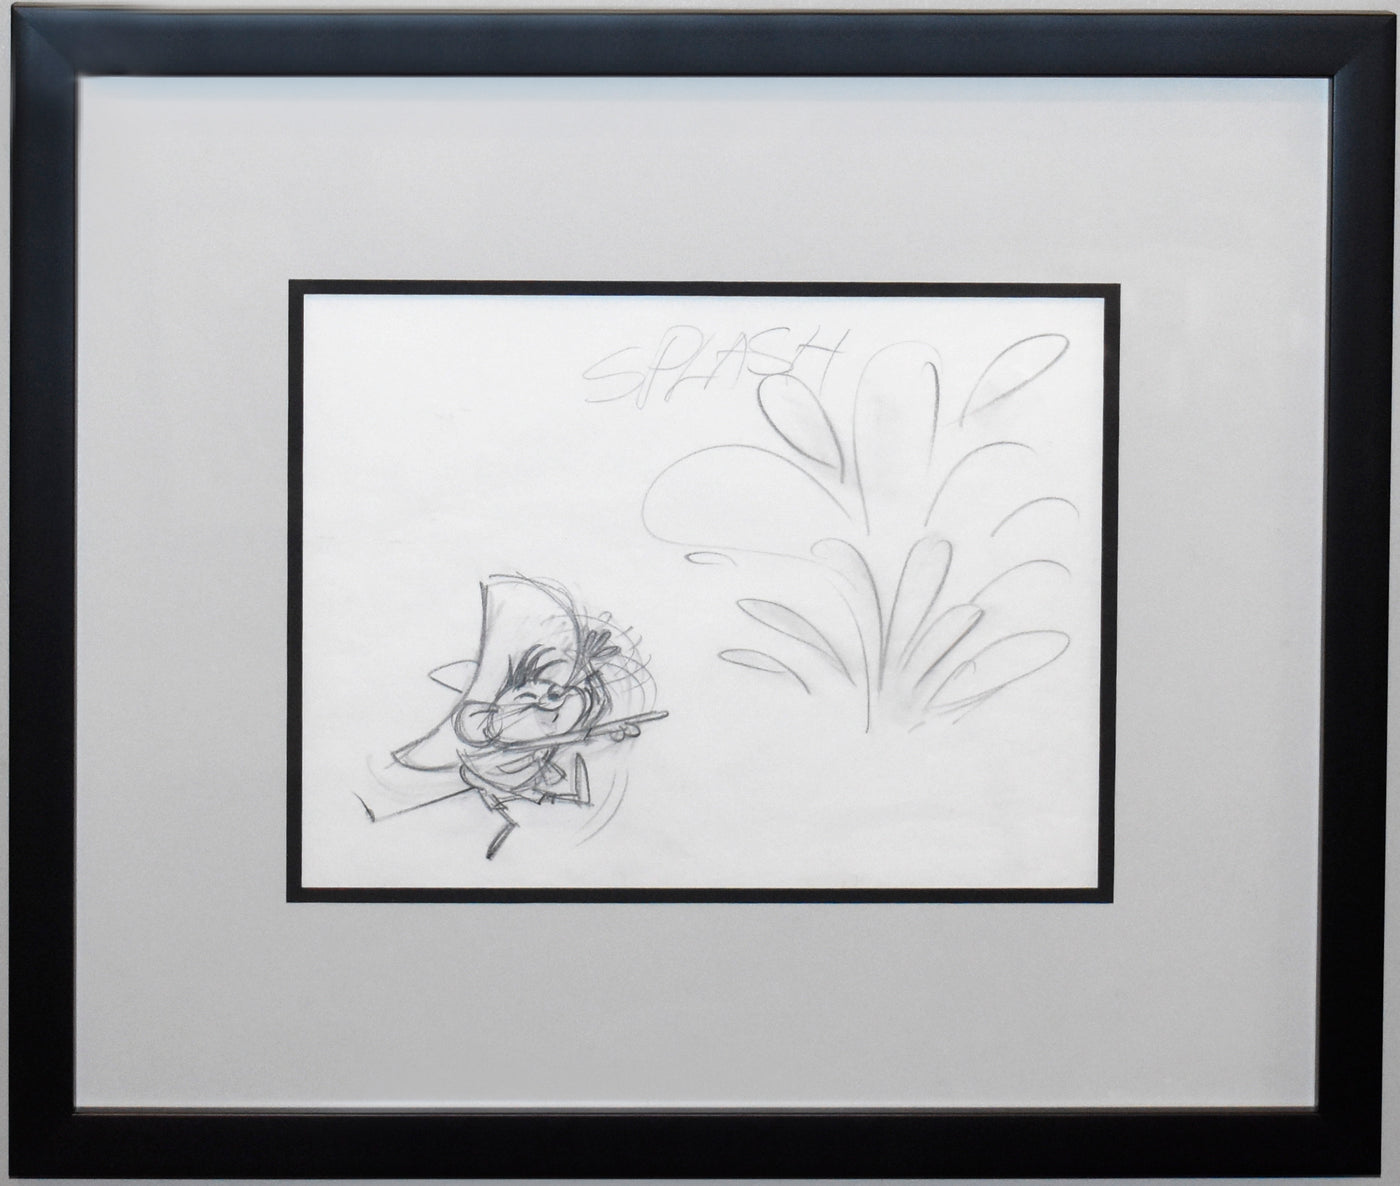 Original Warner Brothers Production Drawing Featuring Speedy Gonzales